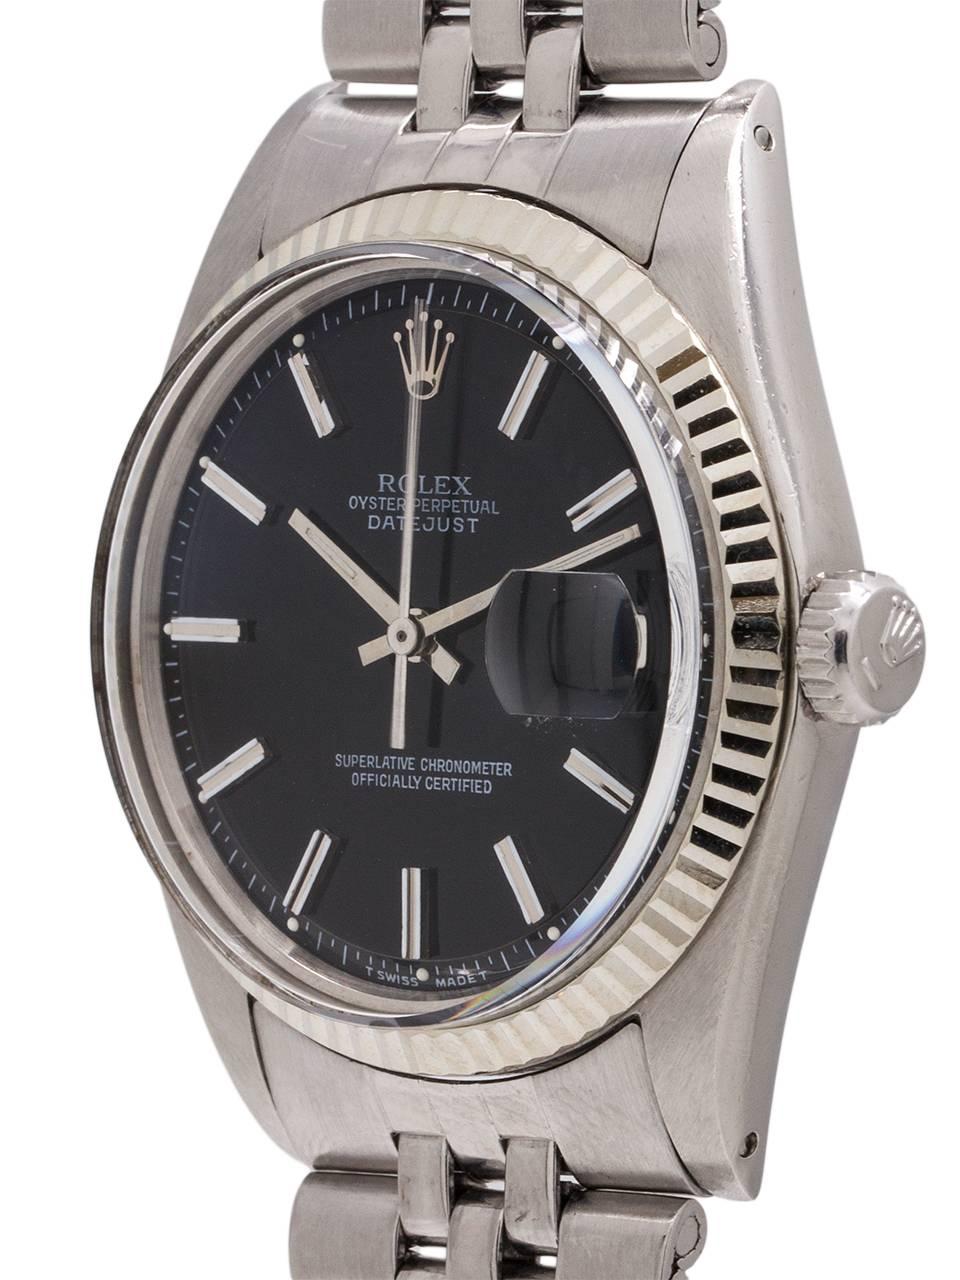 
Vintage Rolex Datejust ref 1601 serial # 5.2 million circa 1977. Featuring 36mm diameter Oyster case with 14K white gold fluted bezel, acrylic crystal, and original glossy black pie pan dial with applied silver indexes and silver baton hands.